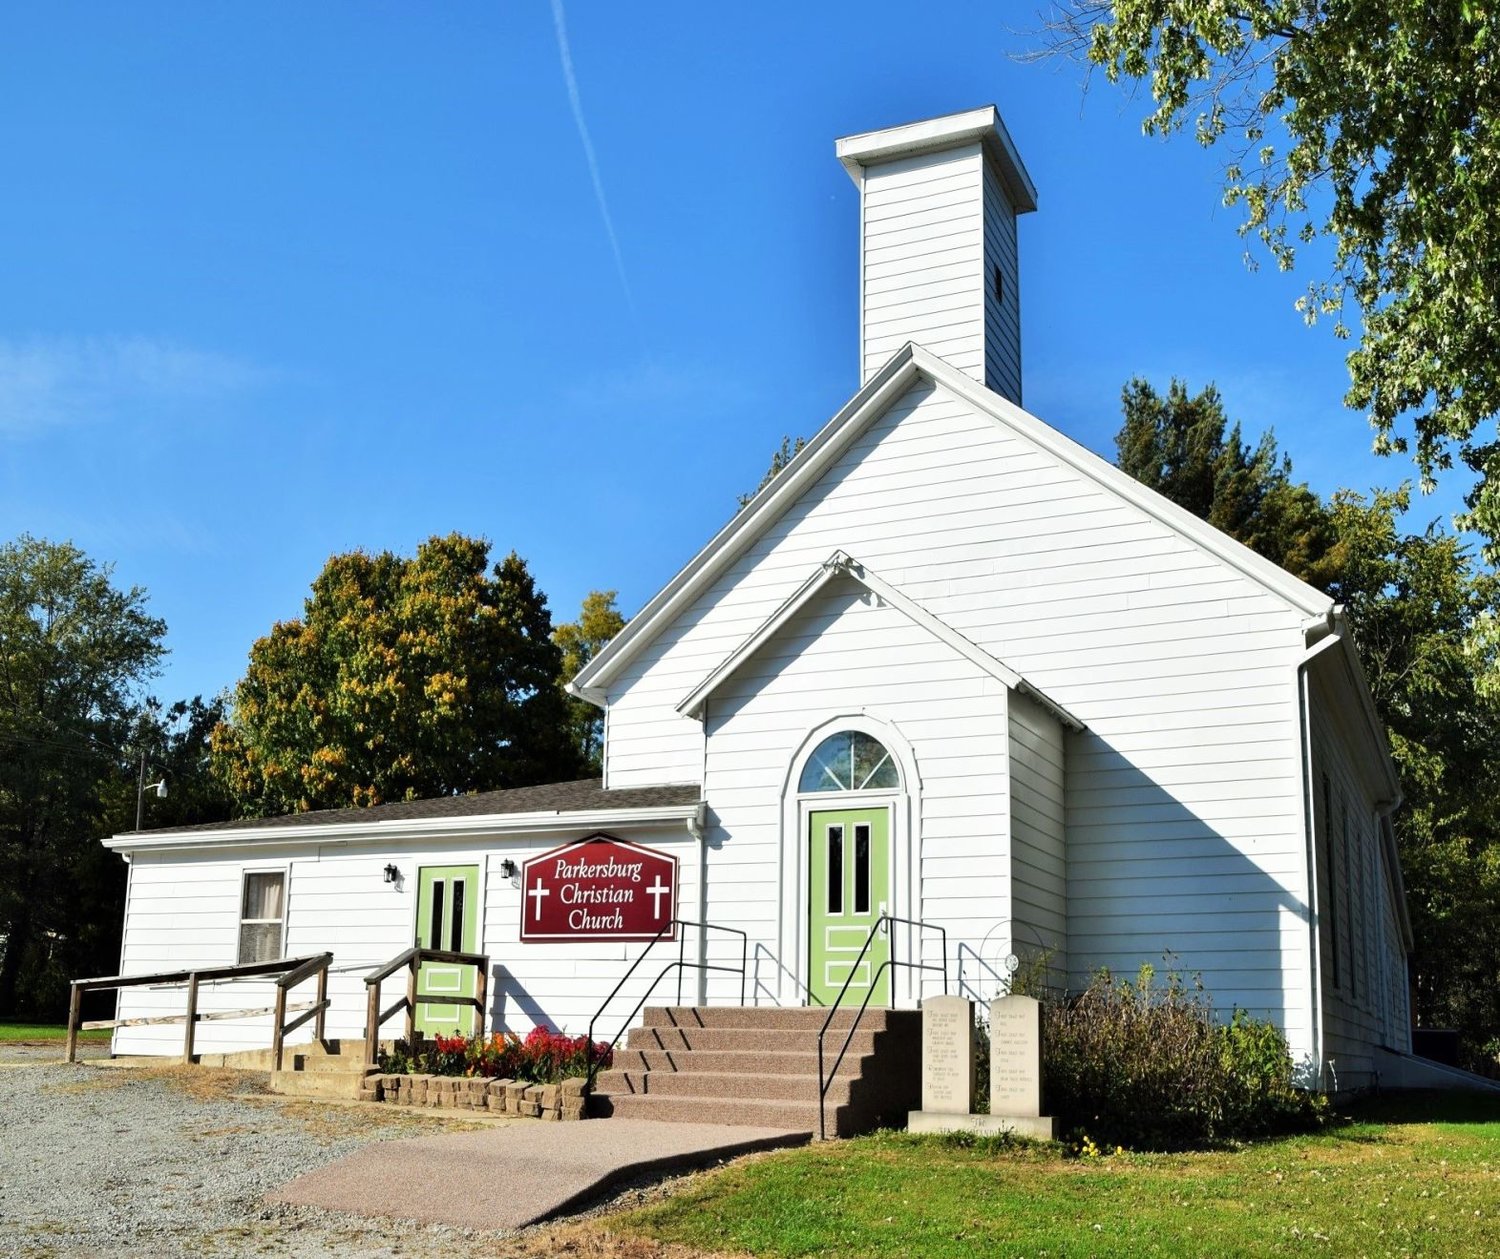 Parkersburg Christian Church will celebrate its 150th anniversary Aug. 9-11, 2019.  